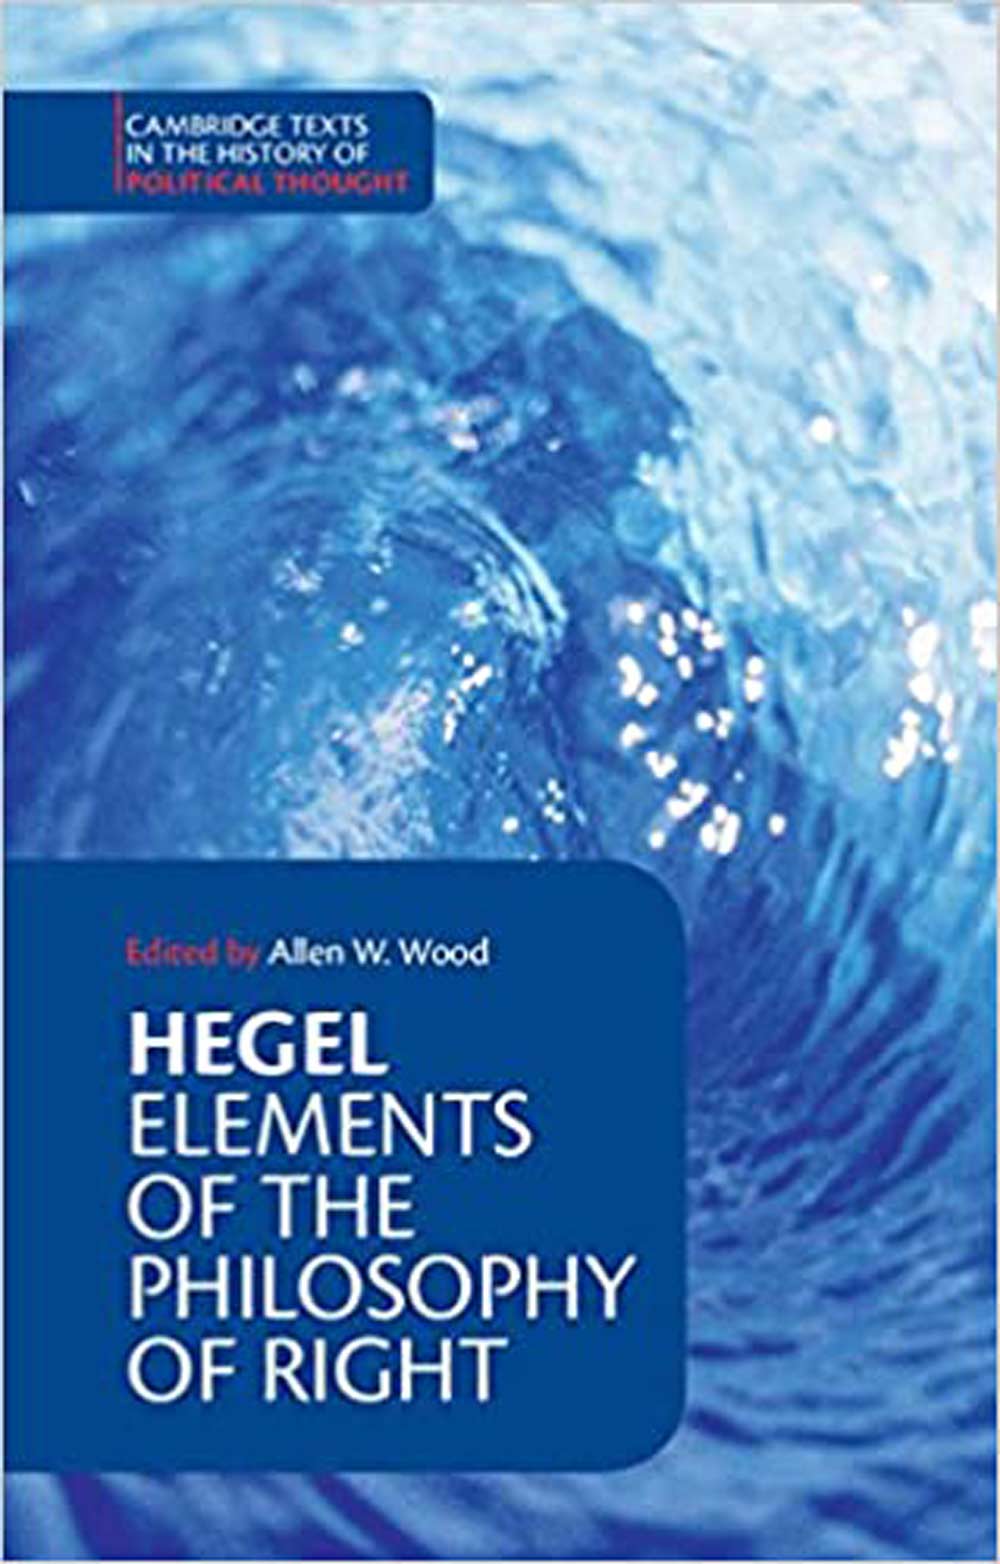 Hegel: Elements of the Philosophy of Right